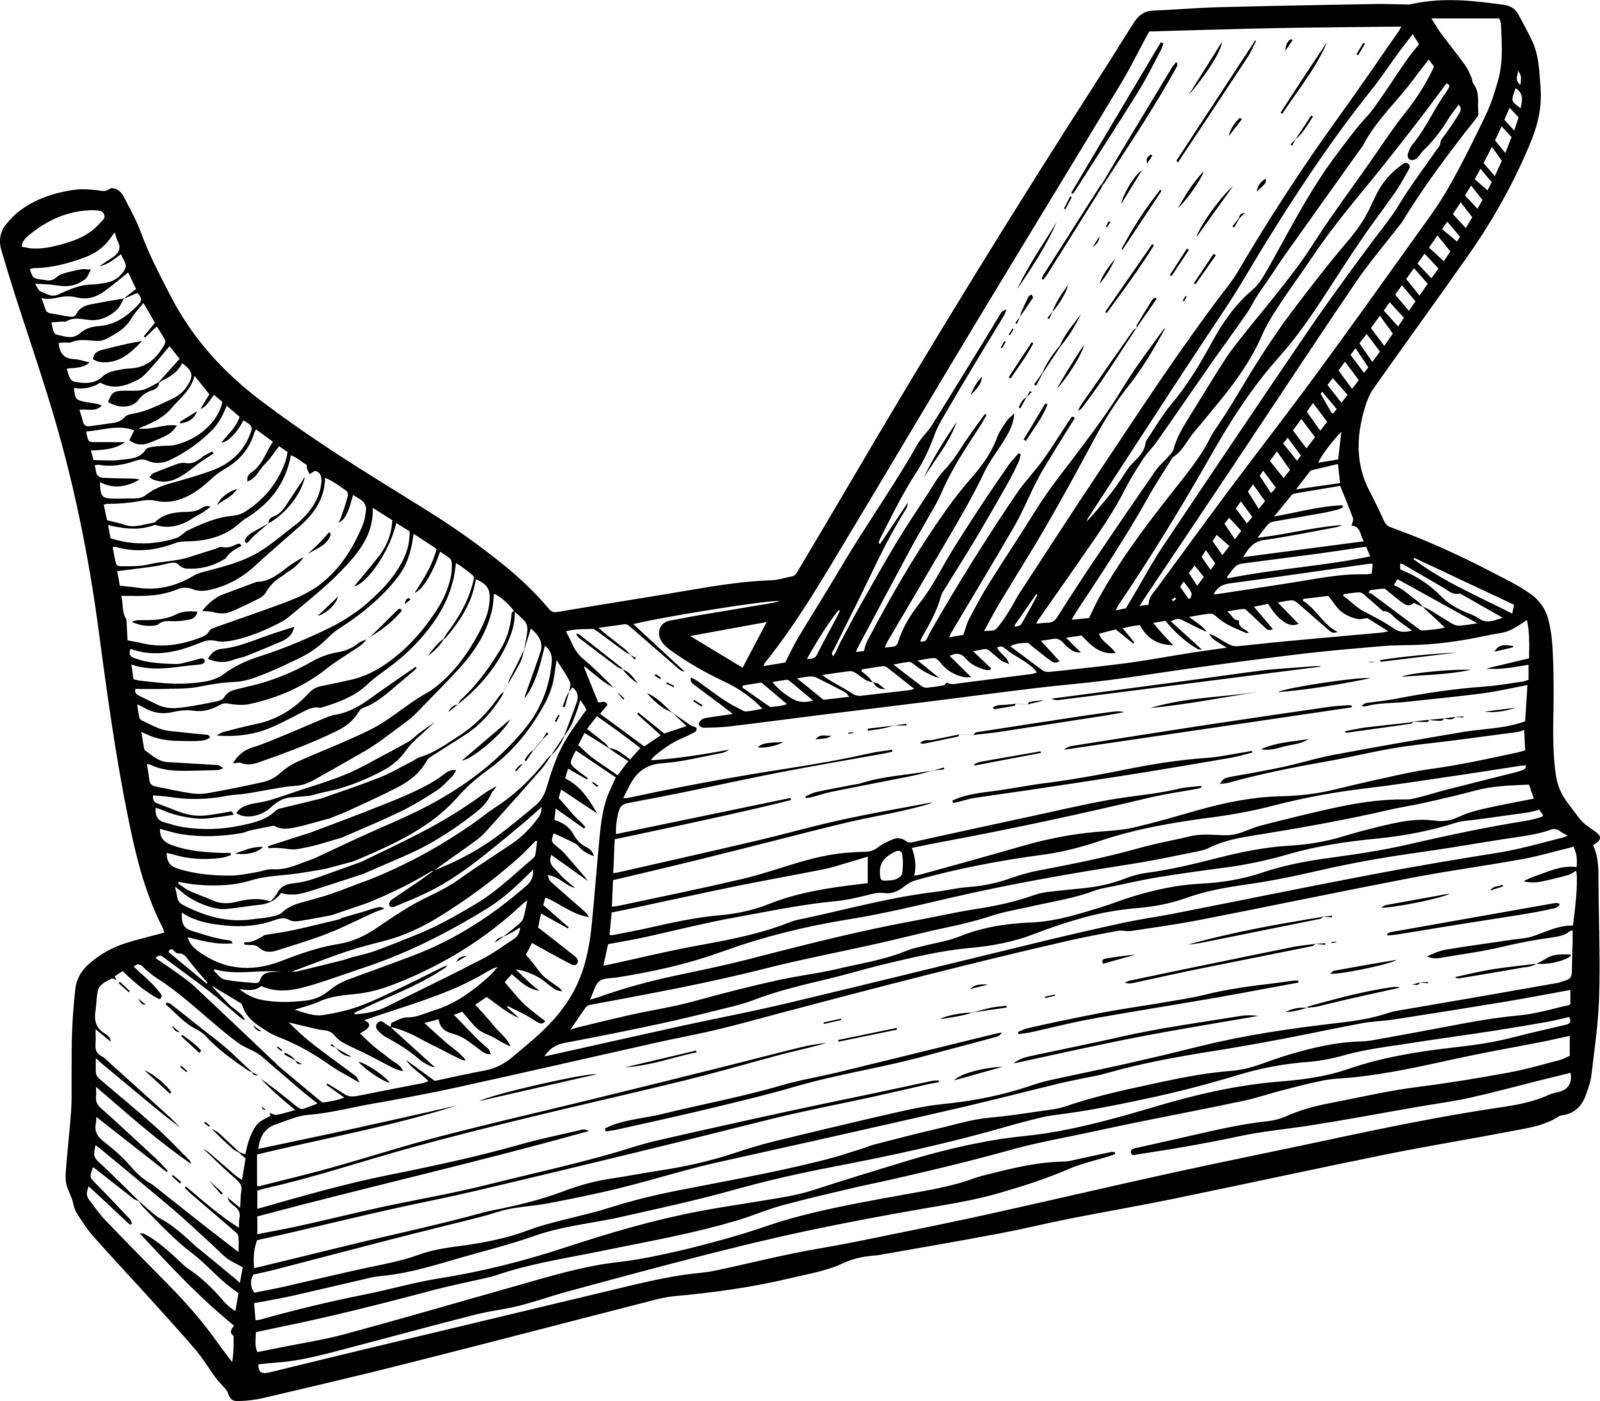 Wooden plane icon in sketch style. Woodworking tool vector illustration.